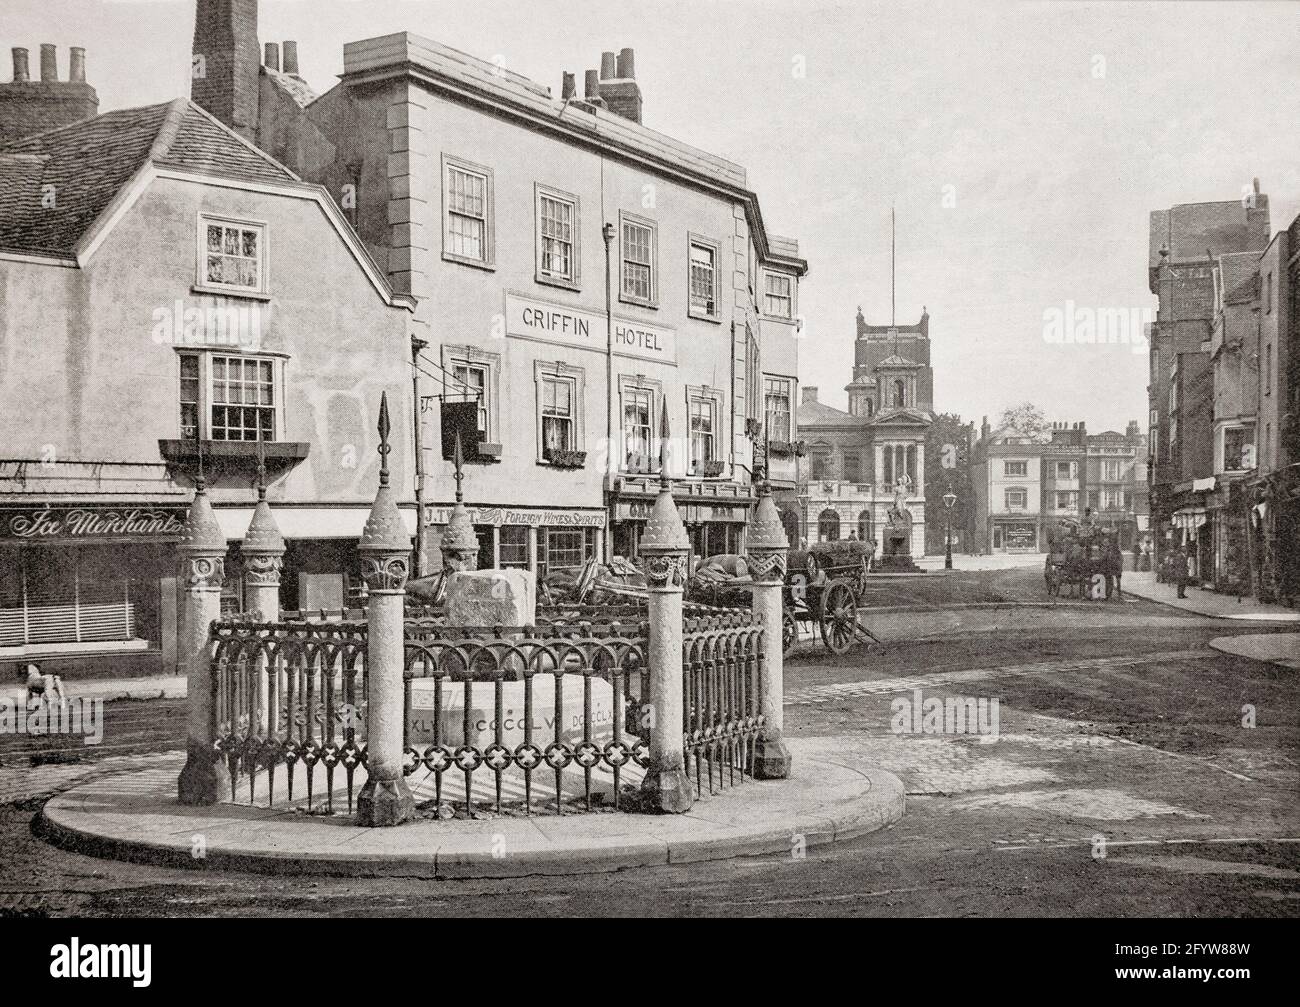 A late 19th century view of the Market Place in Kingston upon Thames aka Kingston, a town and borough in Greater London and within the historic county of Surrey, England. The first surviving record of Kingston is from AD 838 as the site of a meeting between King Egbert of Wessex and Ceolnoth, Archbishop of Canterbury. Many kings who are said to have been crowned in the chapel of St Mary, which collapsed in 1730. Tradition suggests that a large stone recovered from the ruins played a part in the coronations. Initially used as a mounting block, it was moved to the market in 1850 as seen in the p Stock Photo